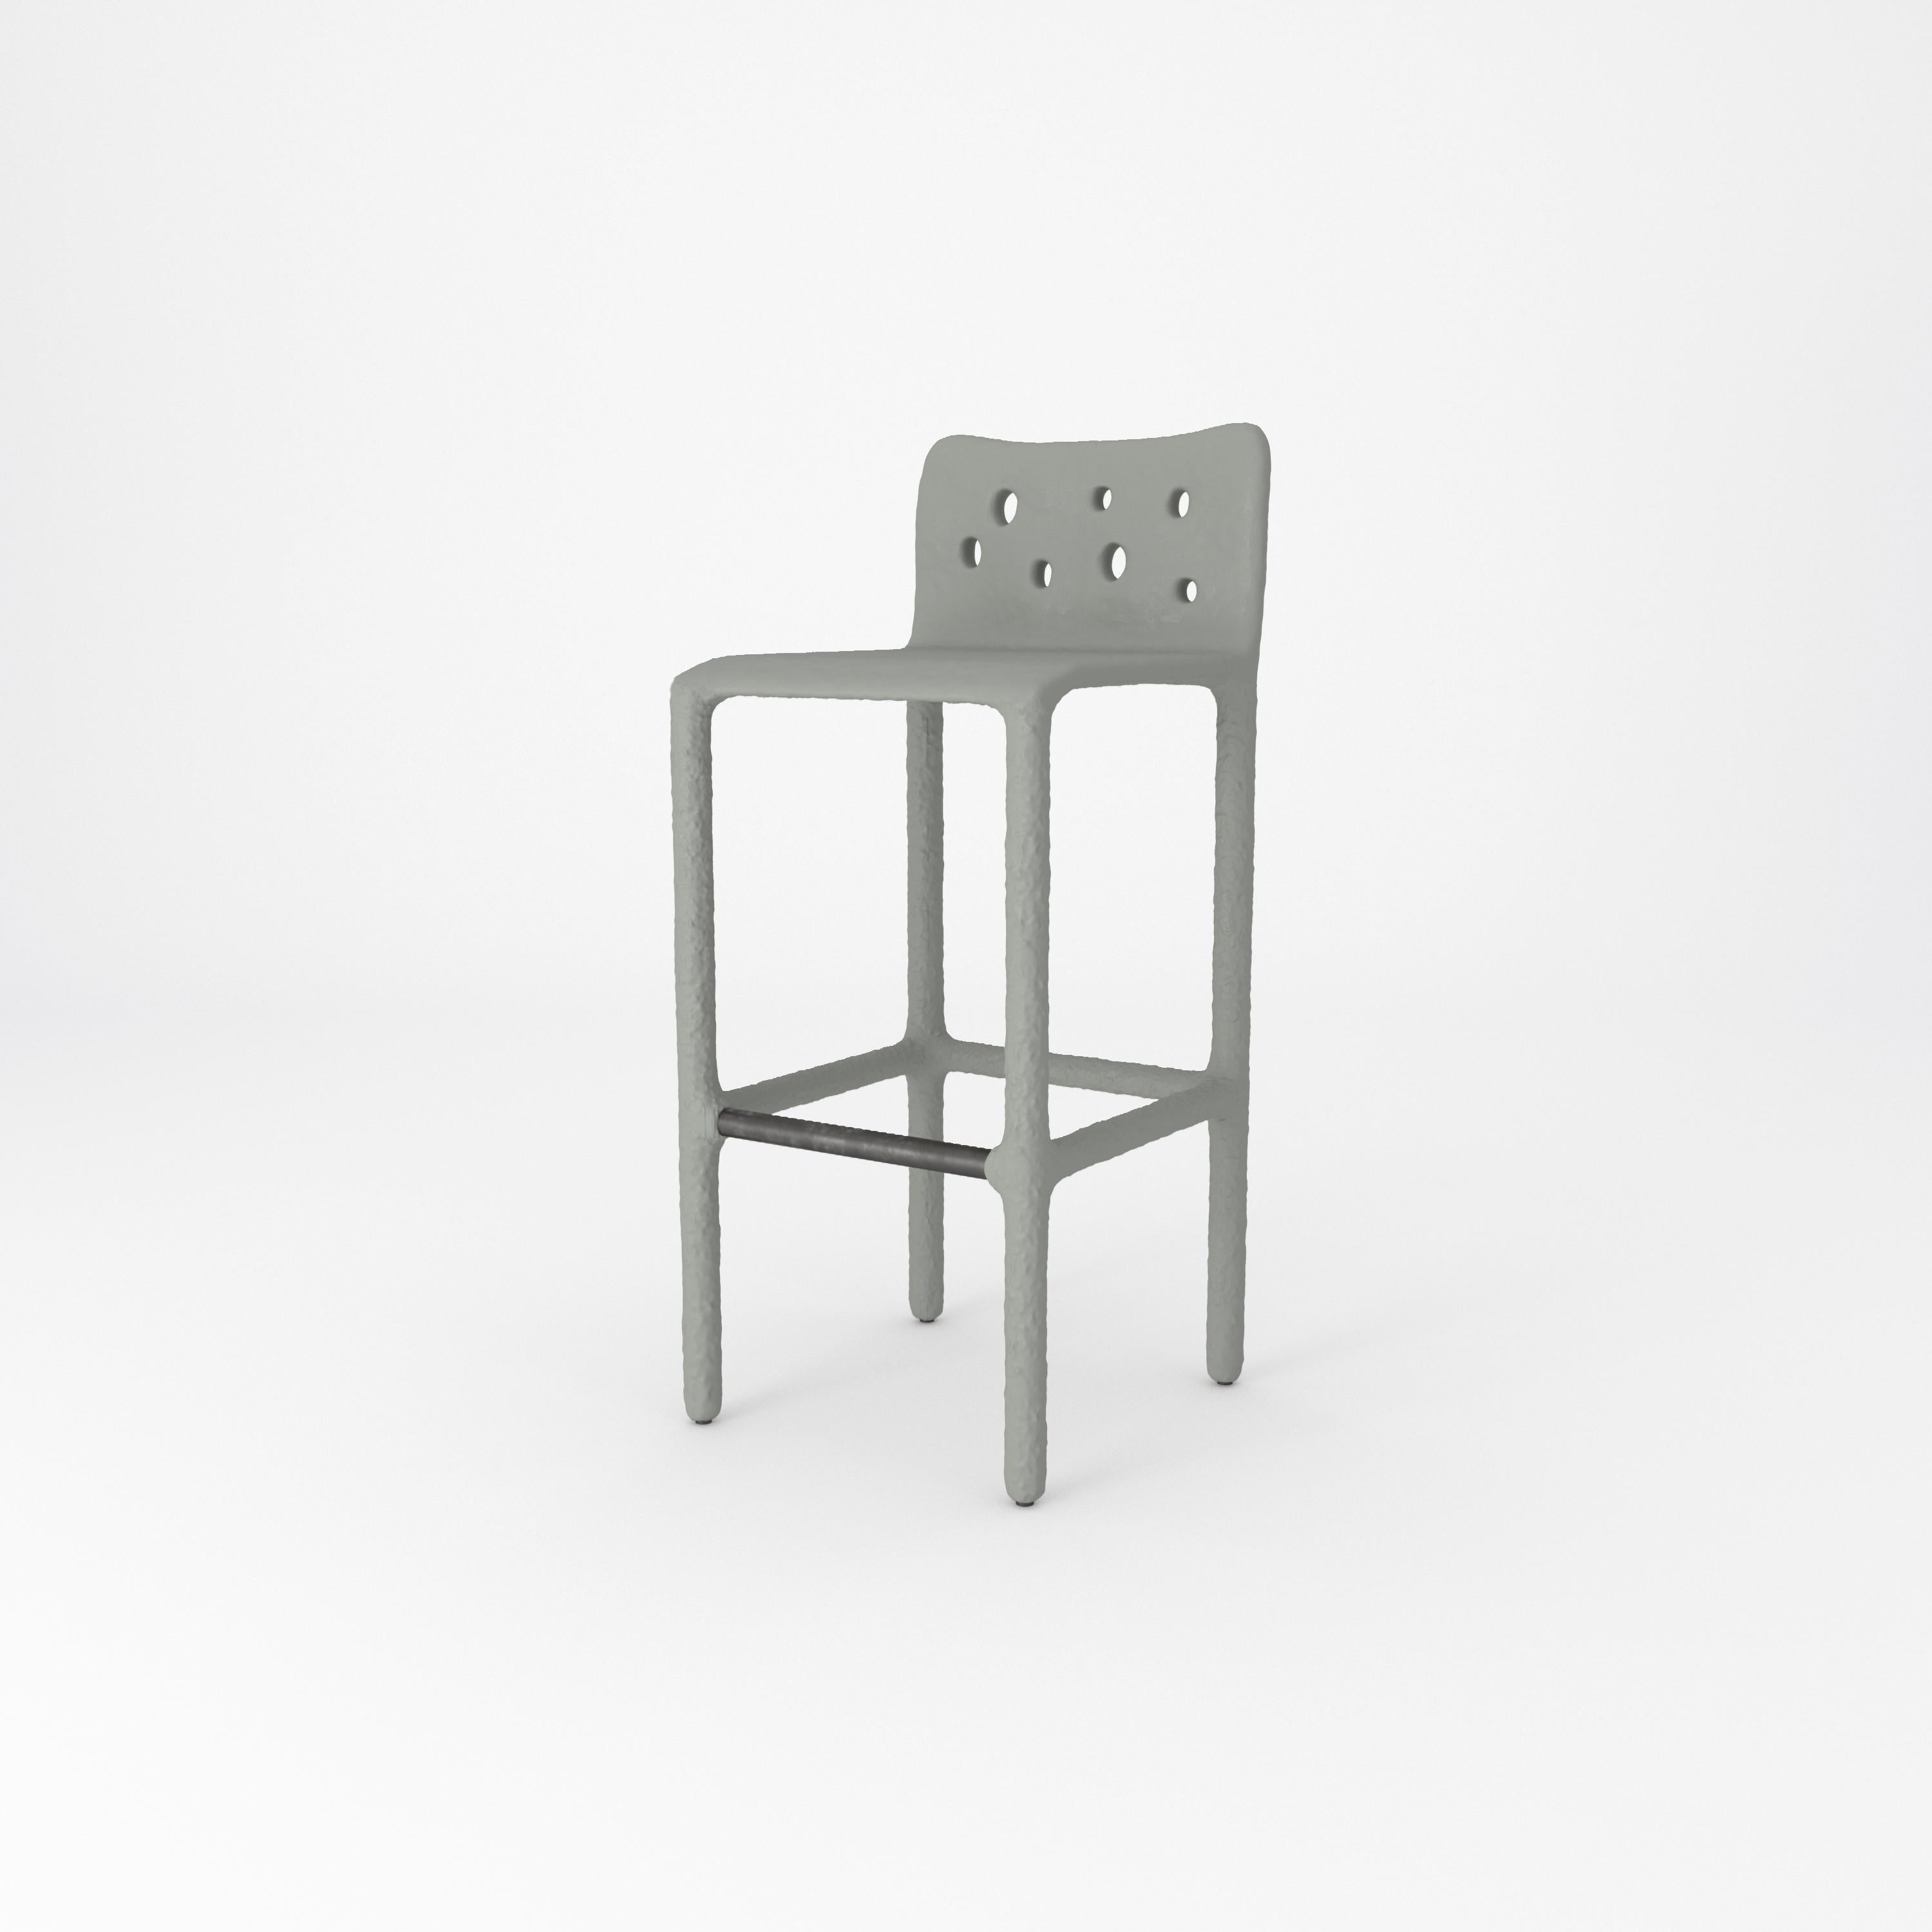 Blue Sculpted Contemporary Chair by Faina For Sale 4